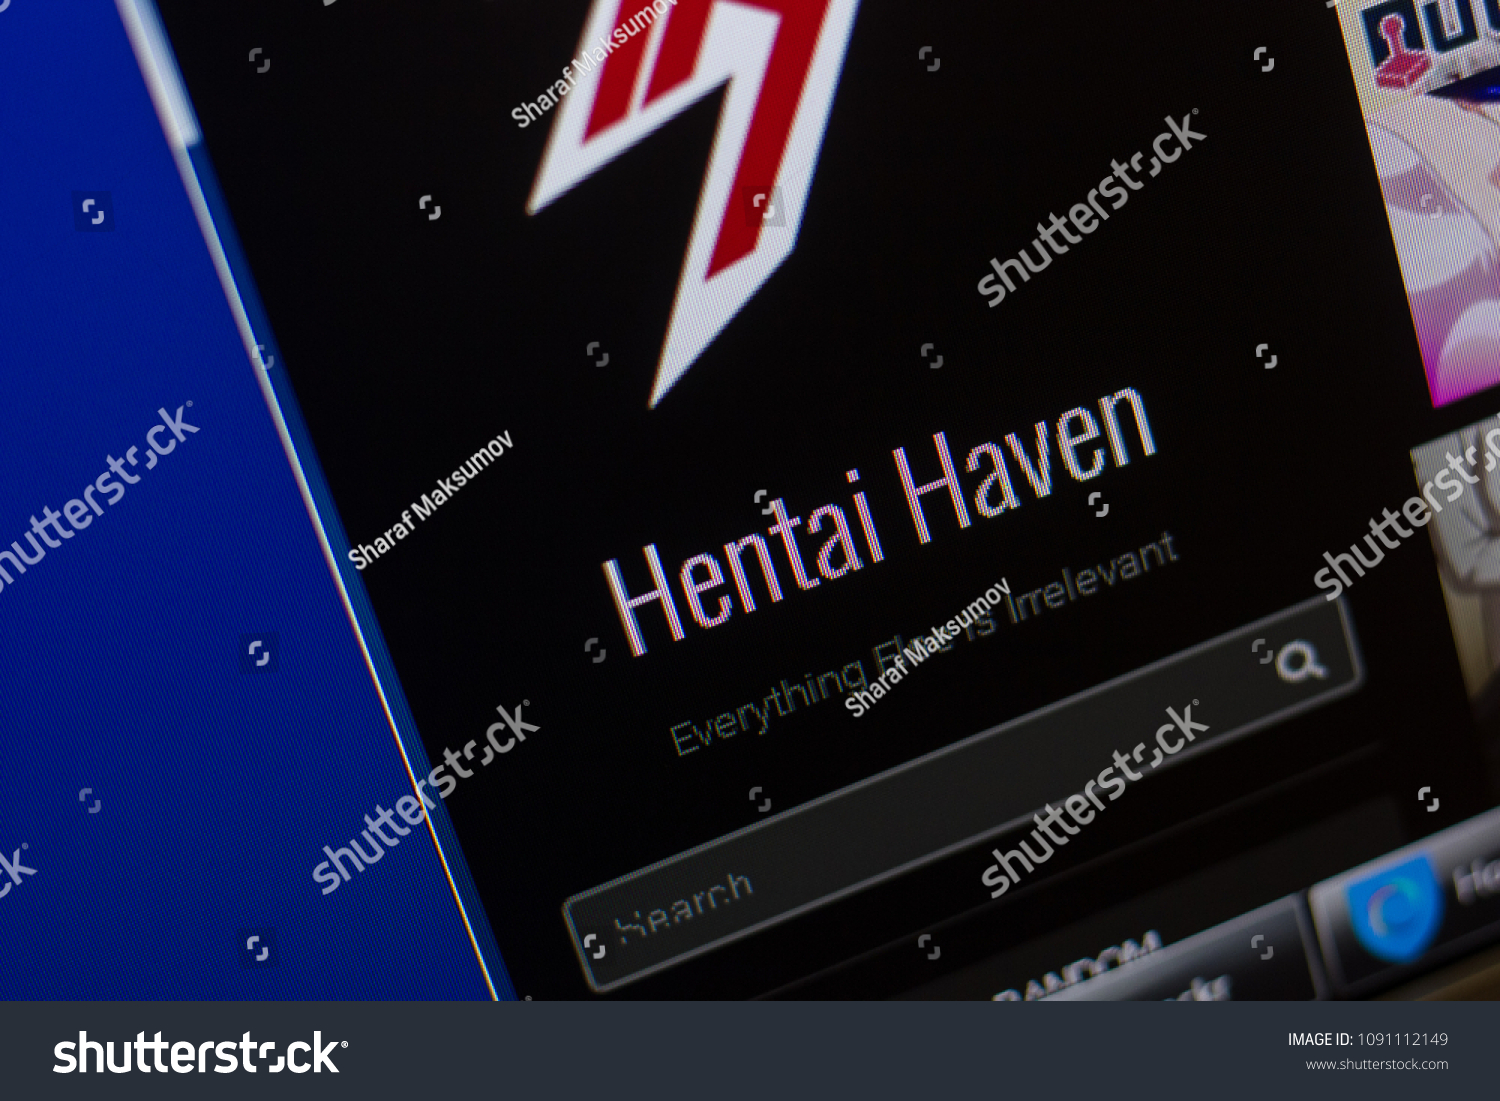 Hentaihaven.Orgf